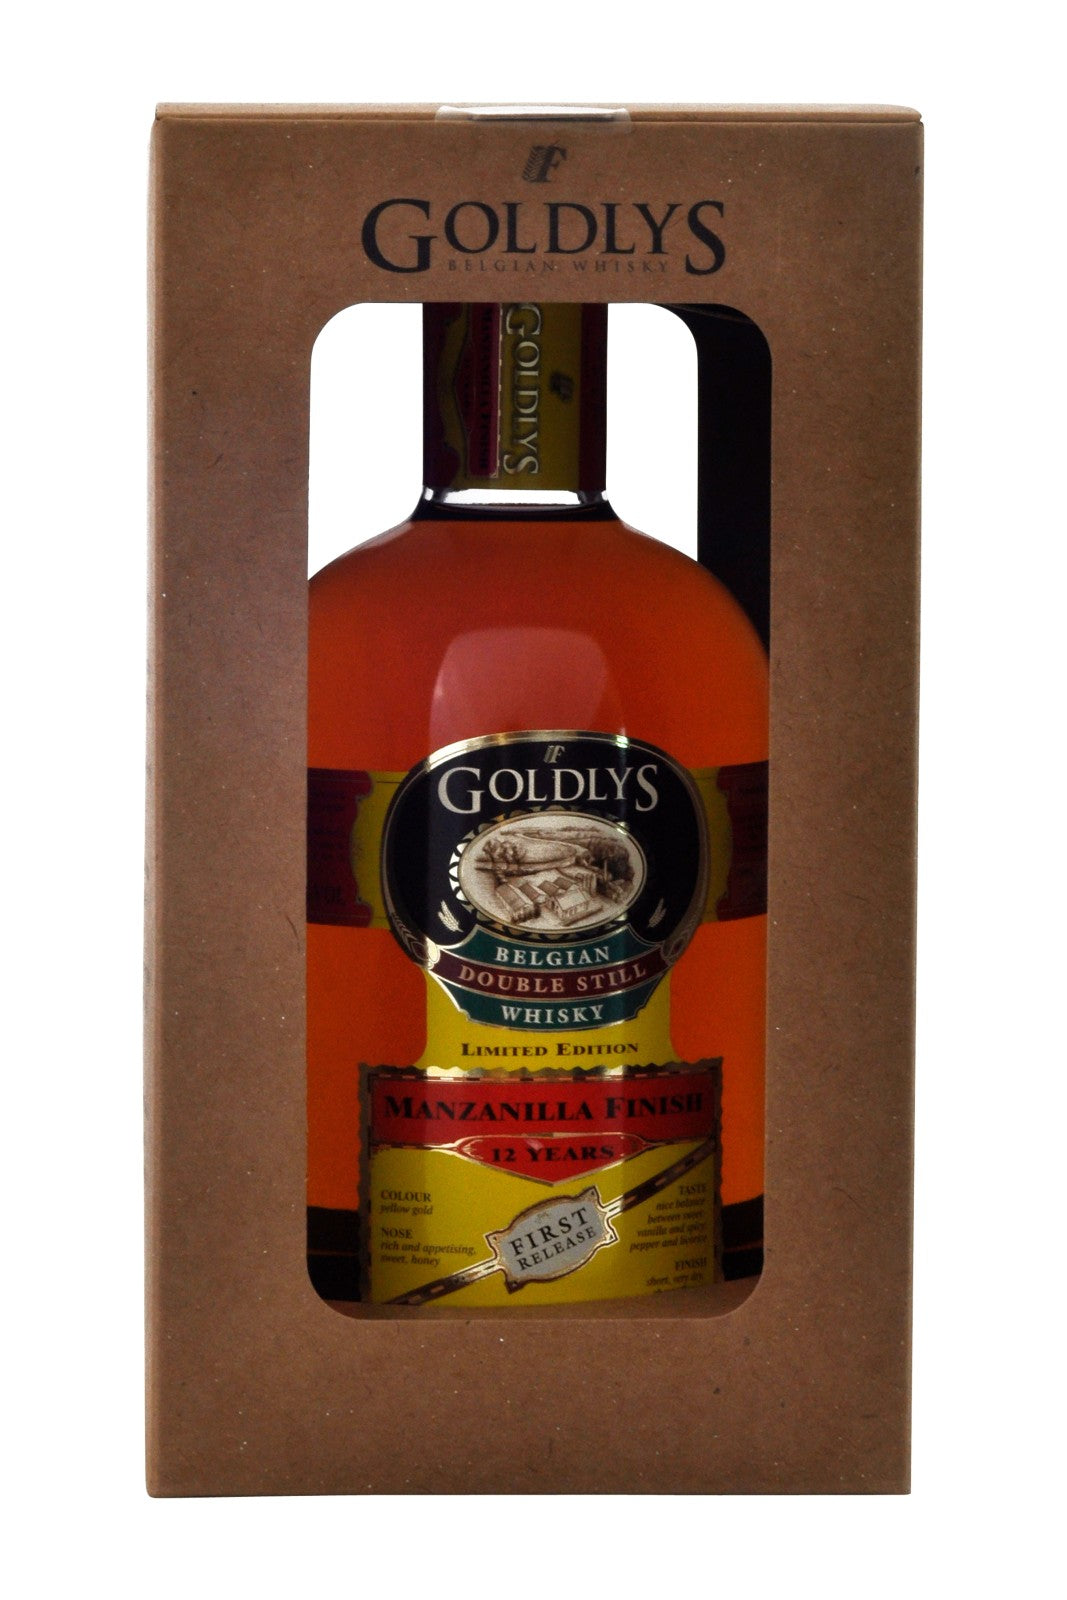 Goldlys 12 Year Old Manzanilla Finish (First Release)